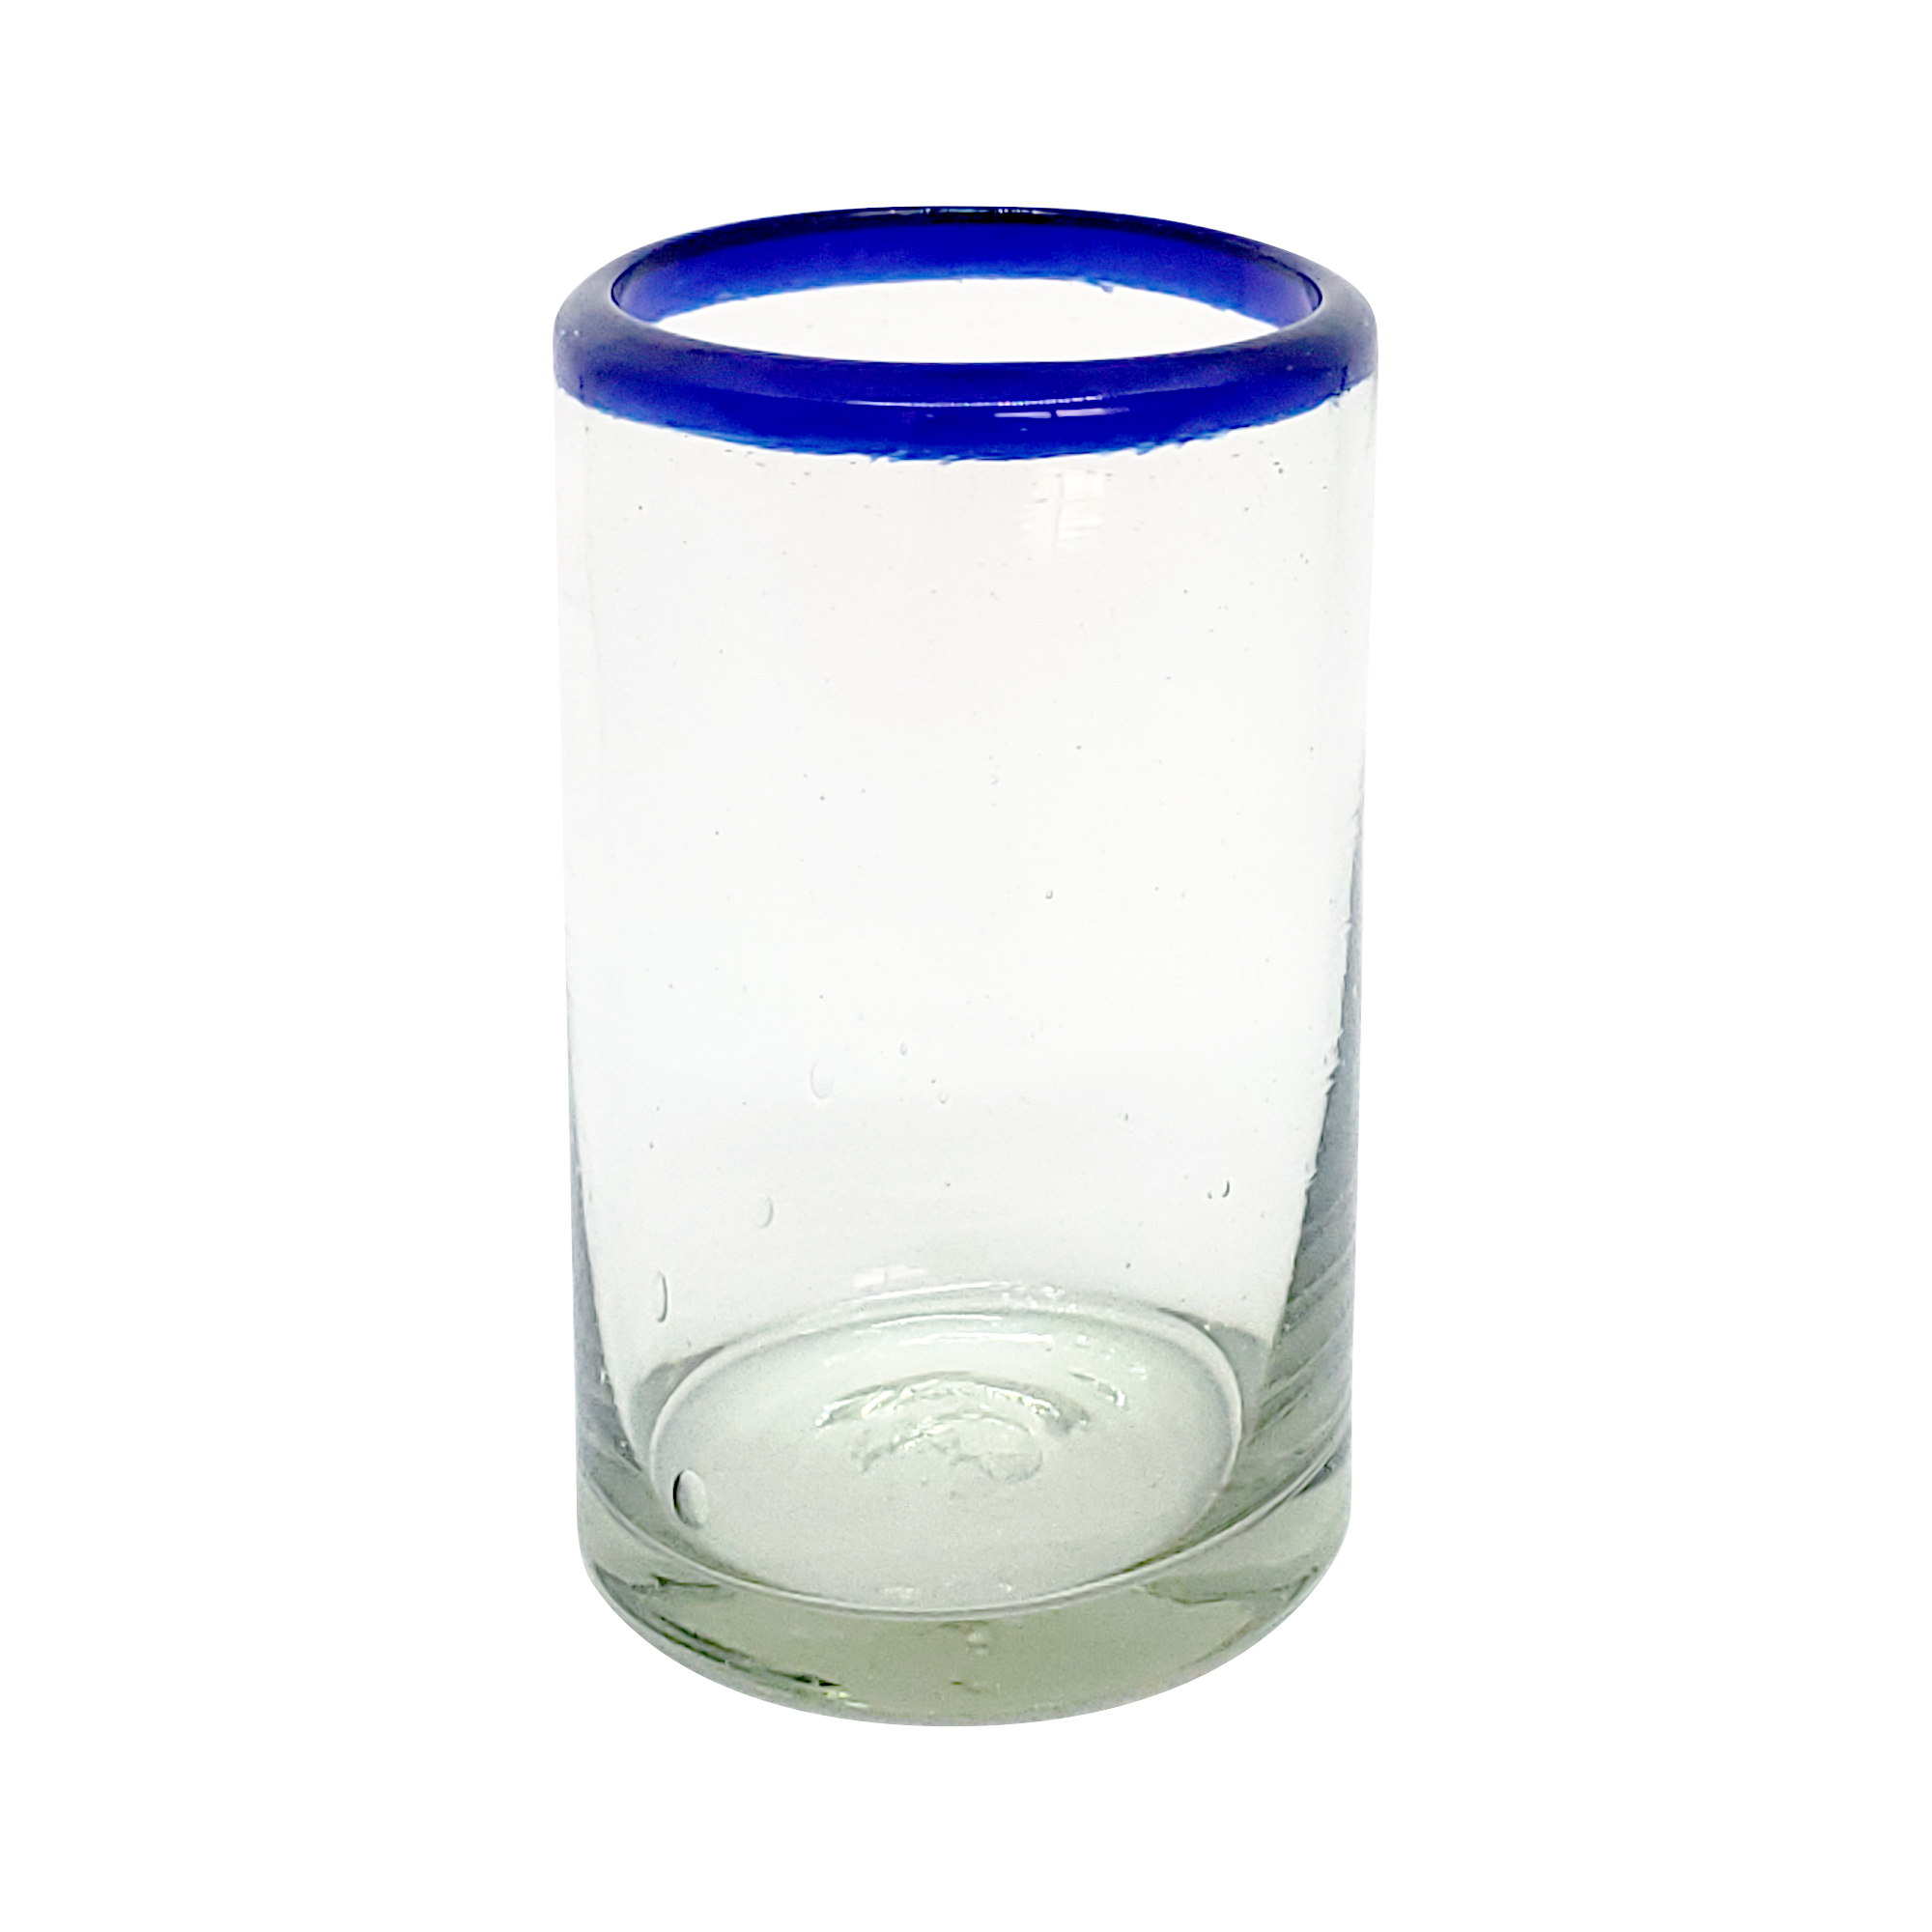 MEXICAN GLASSWARE / Cobalt Blue Rim 9 oz Juice Glasses (set of 6) / For those who enjoy fresh squeezed fruit juice in the morning, these small glasses are just the right size. Made from authentic recycled glass.